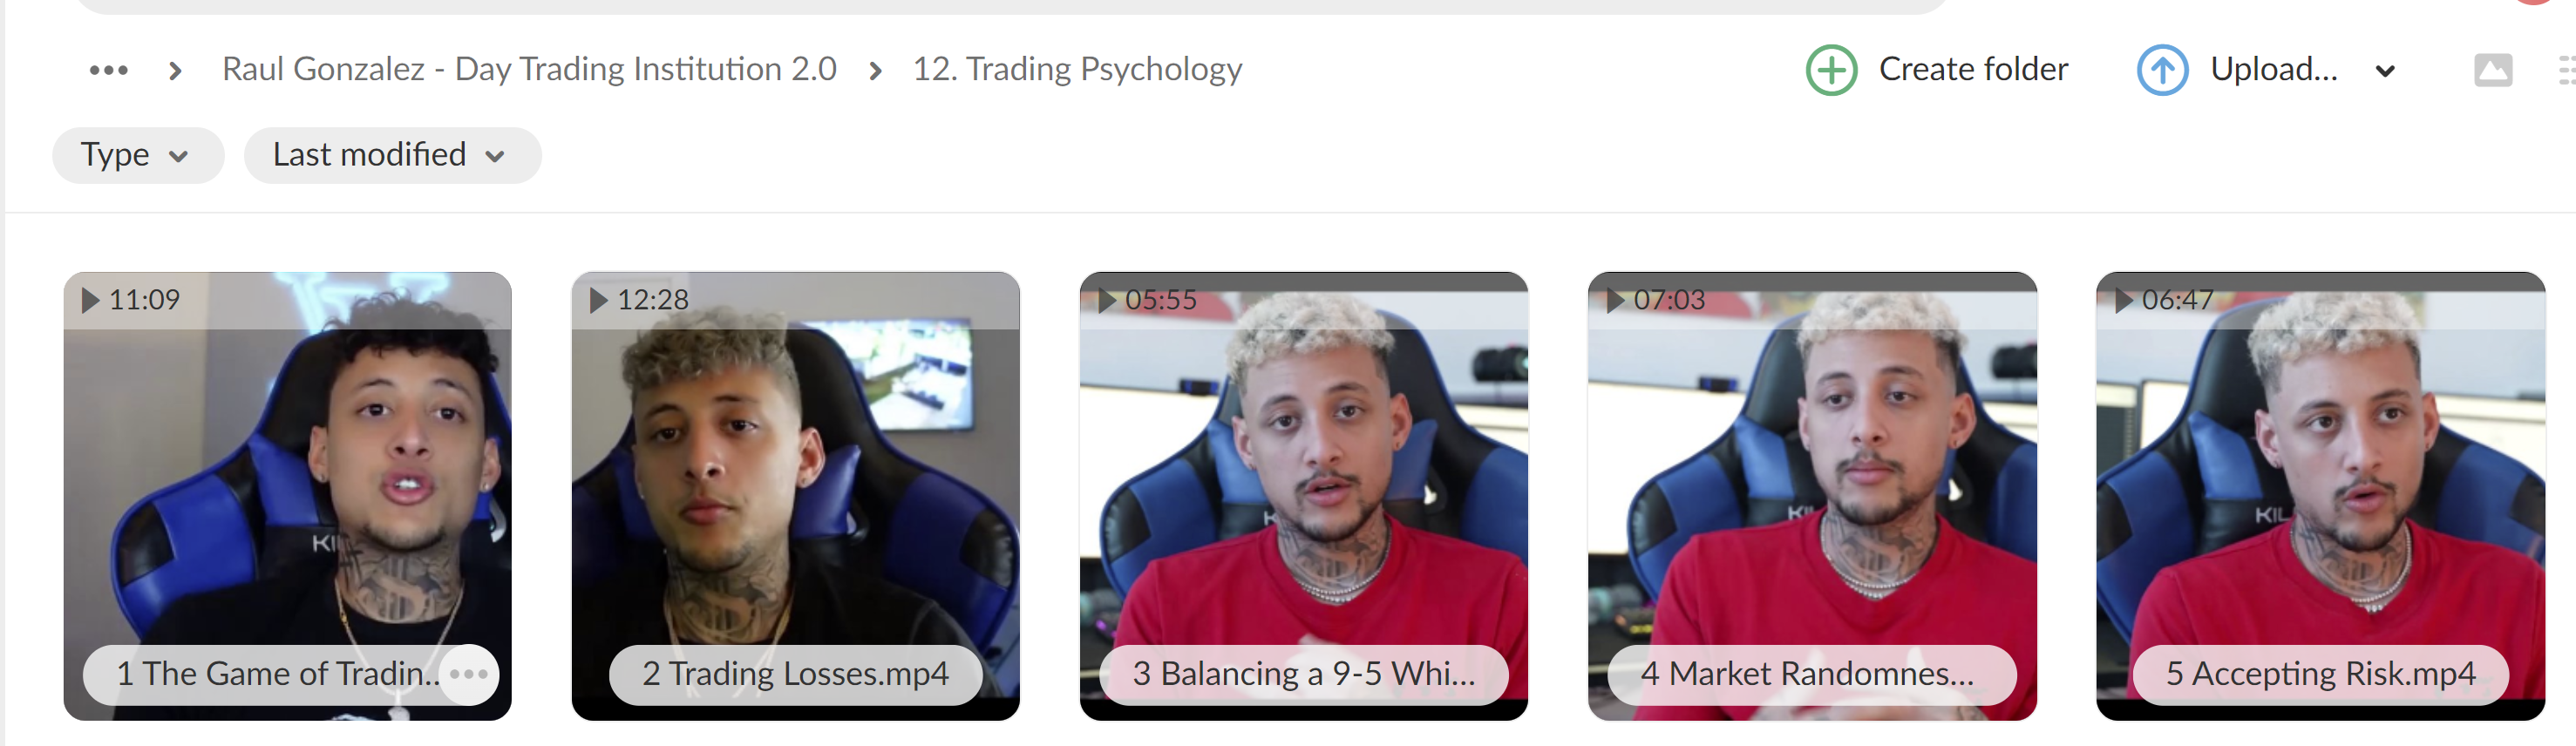 Day Trading Institution Trading Psychology